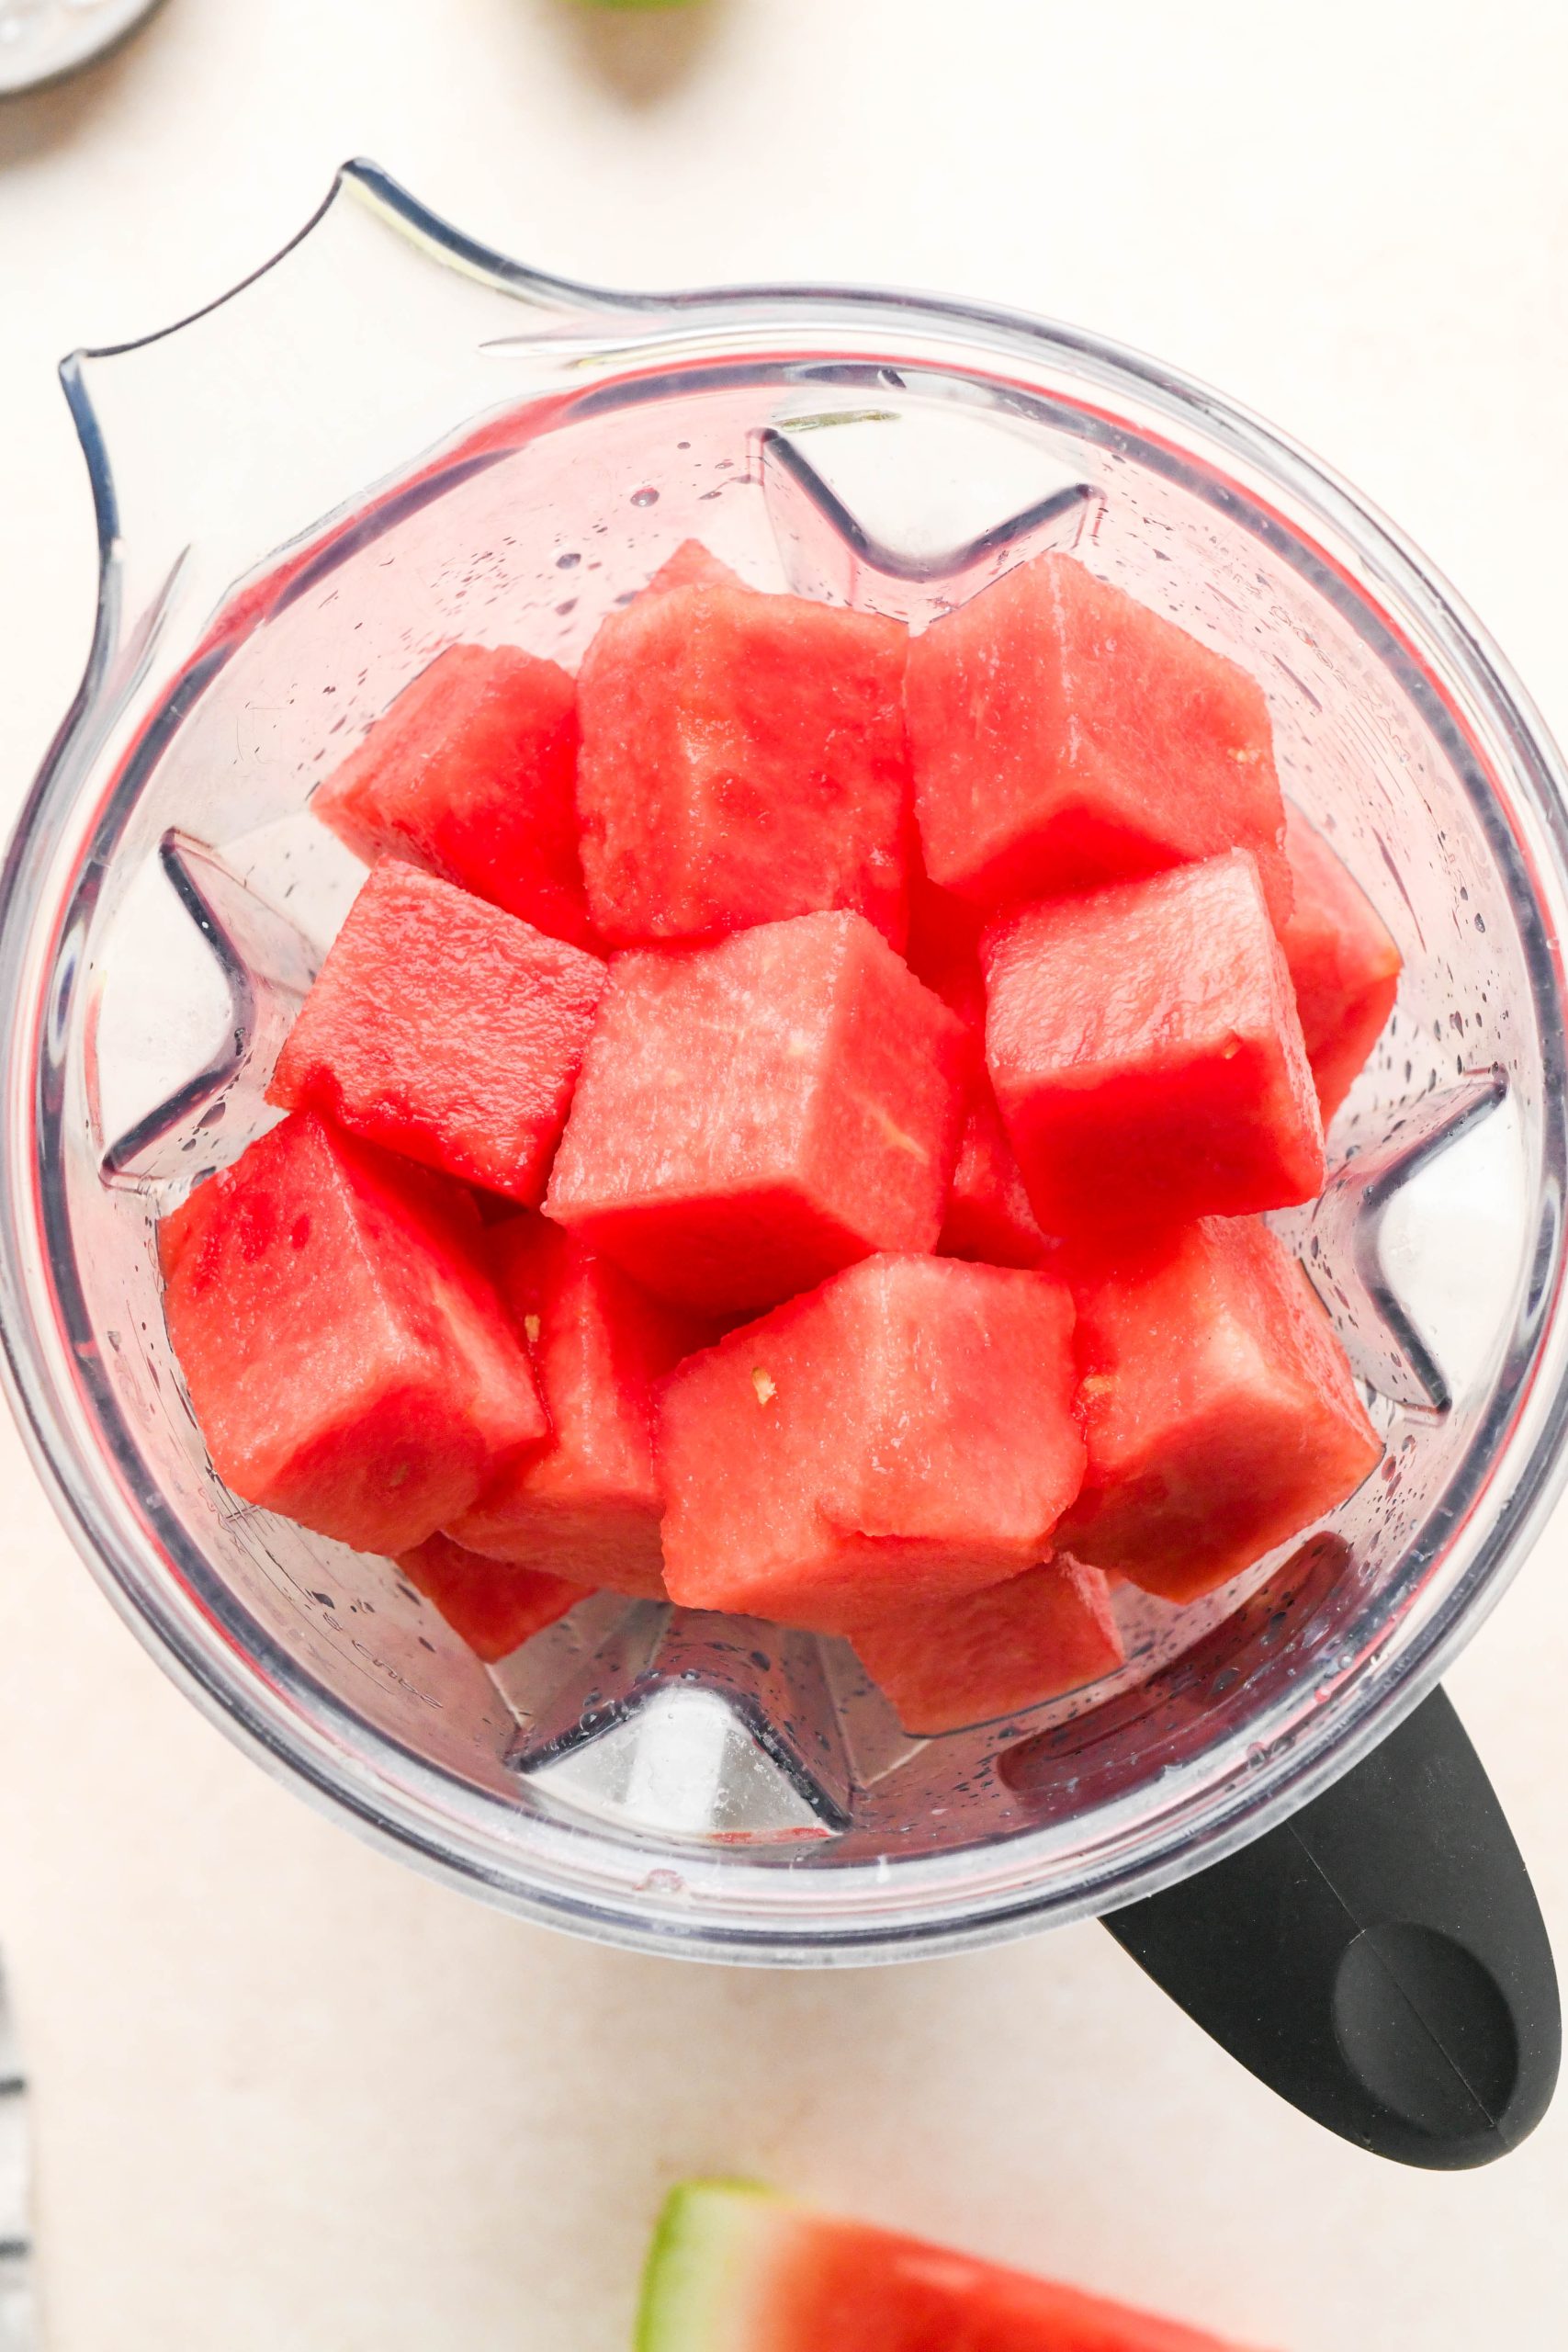 How to make watermelon juice: Cubed watermelon in a blender container.